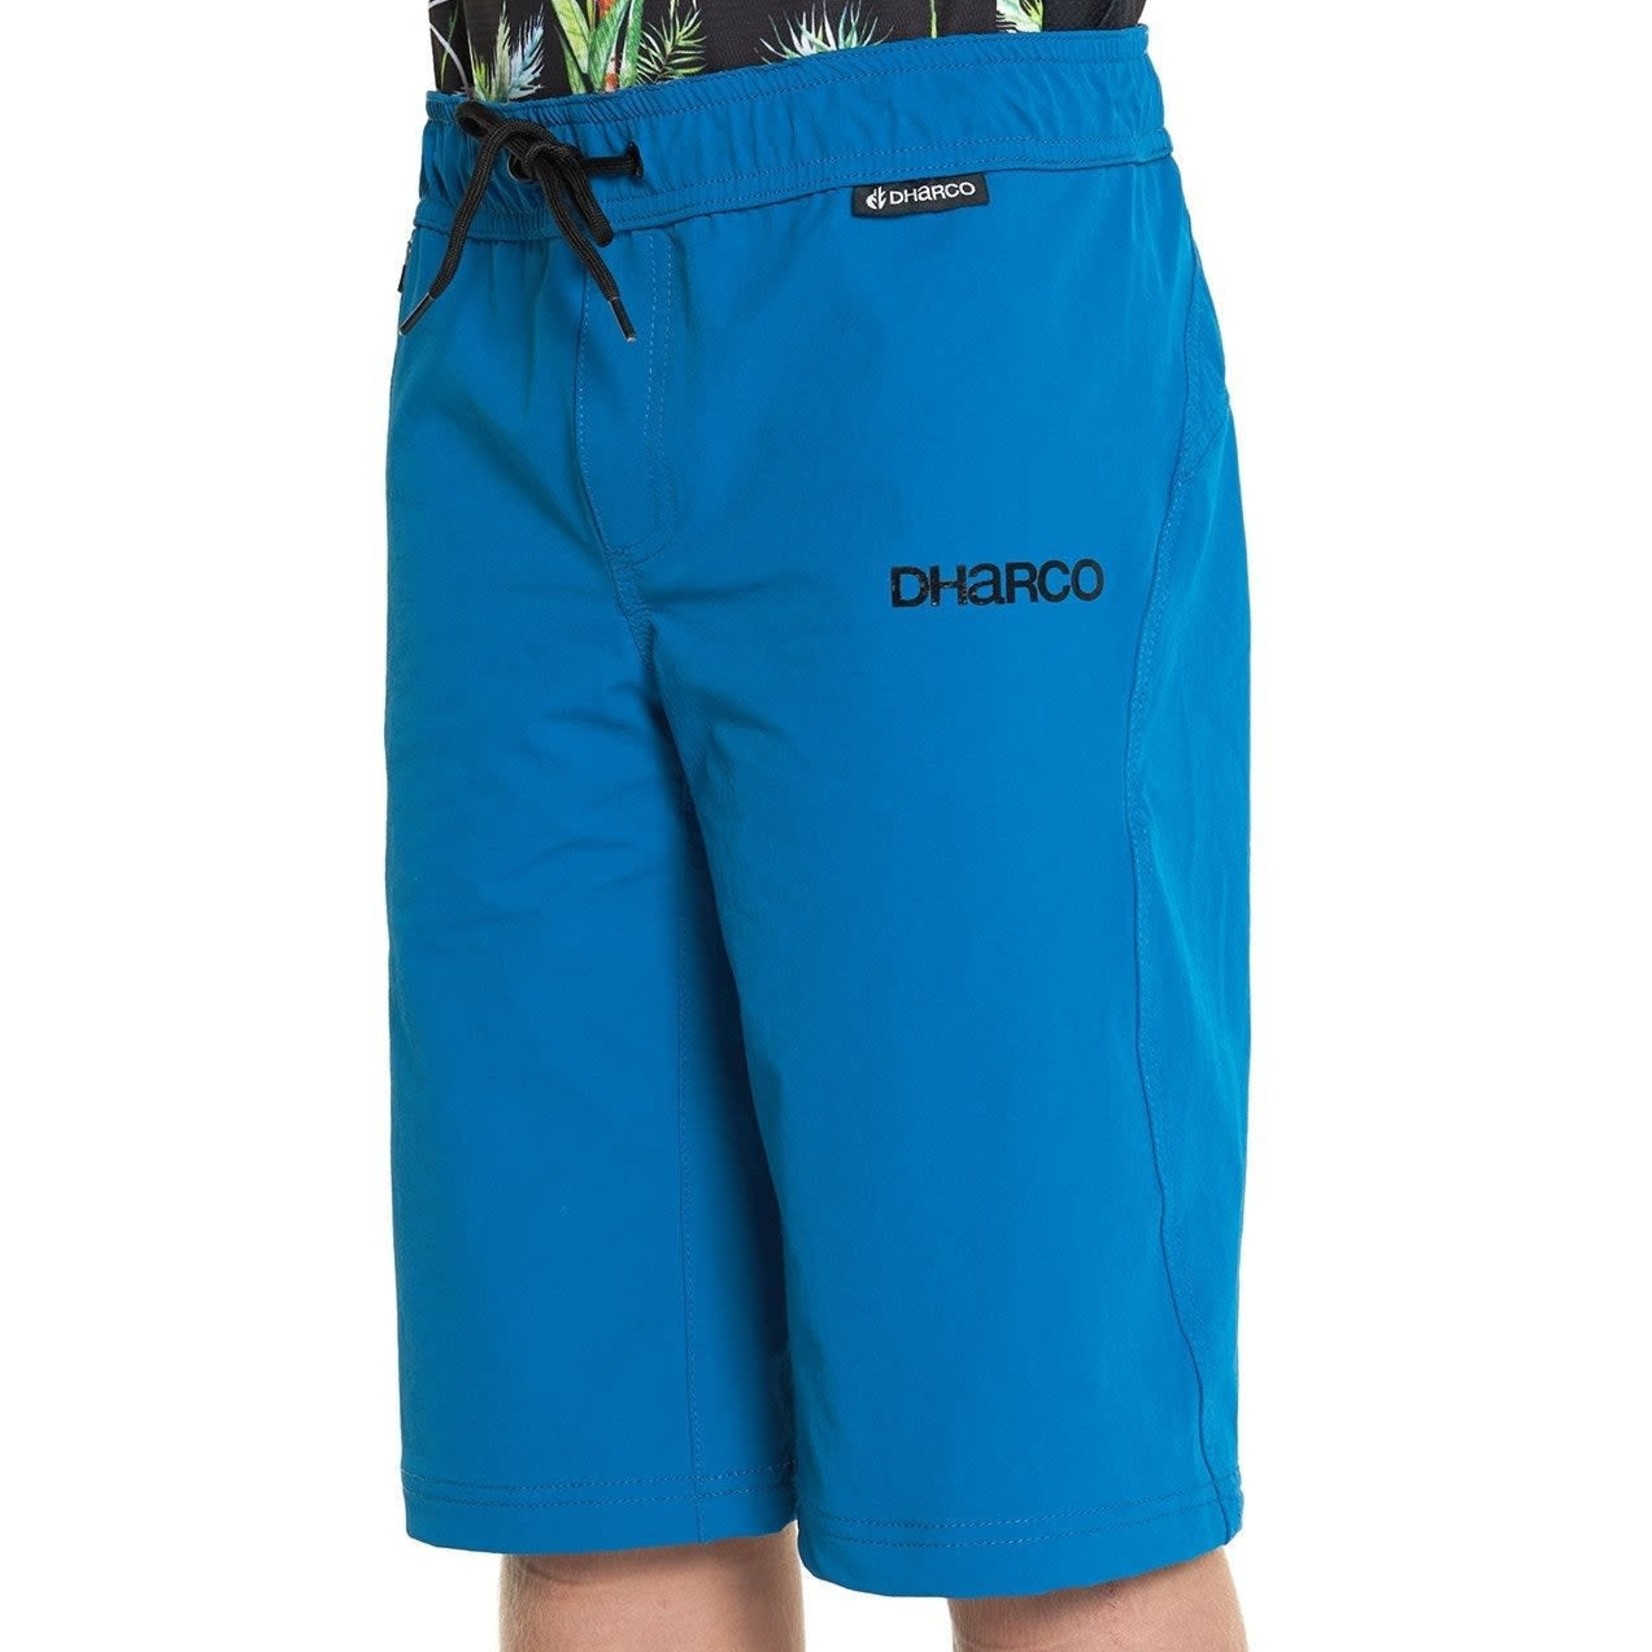 DHaRCO DHaRCO Youth Gravity Shorts Blue YXL / 12